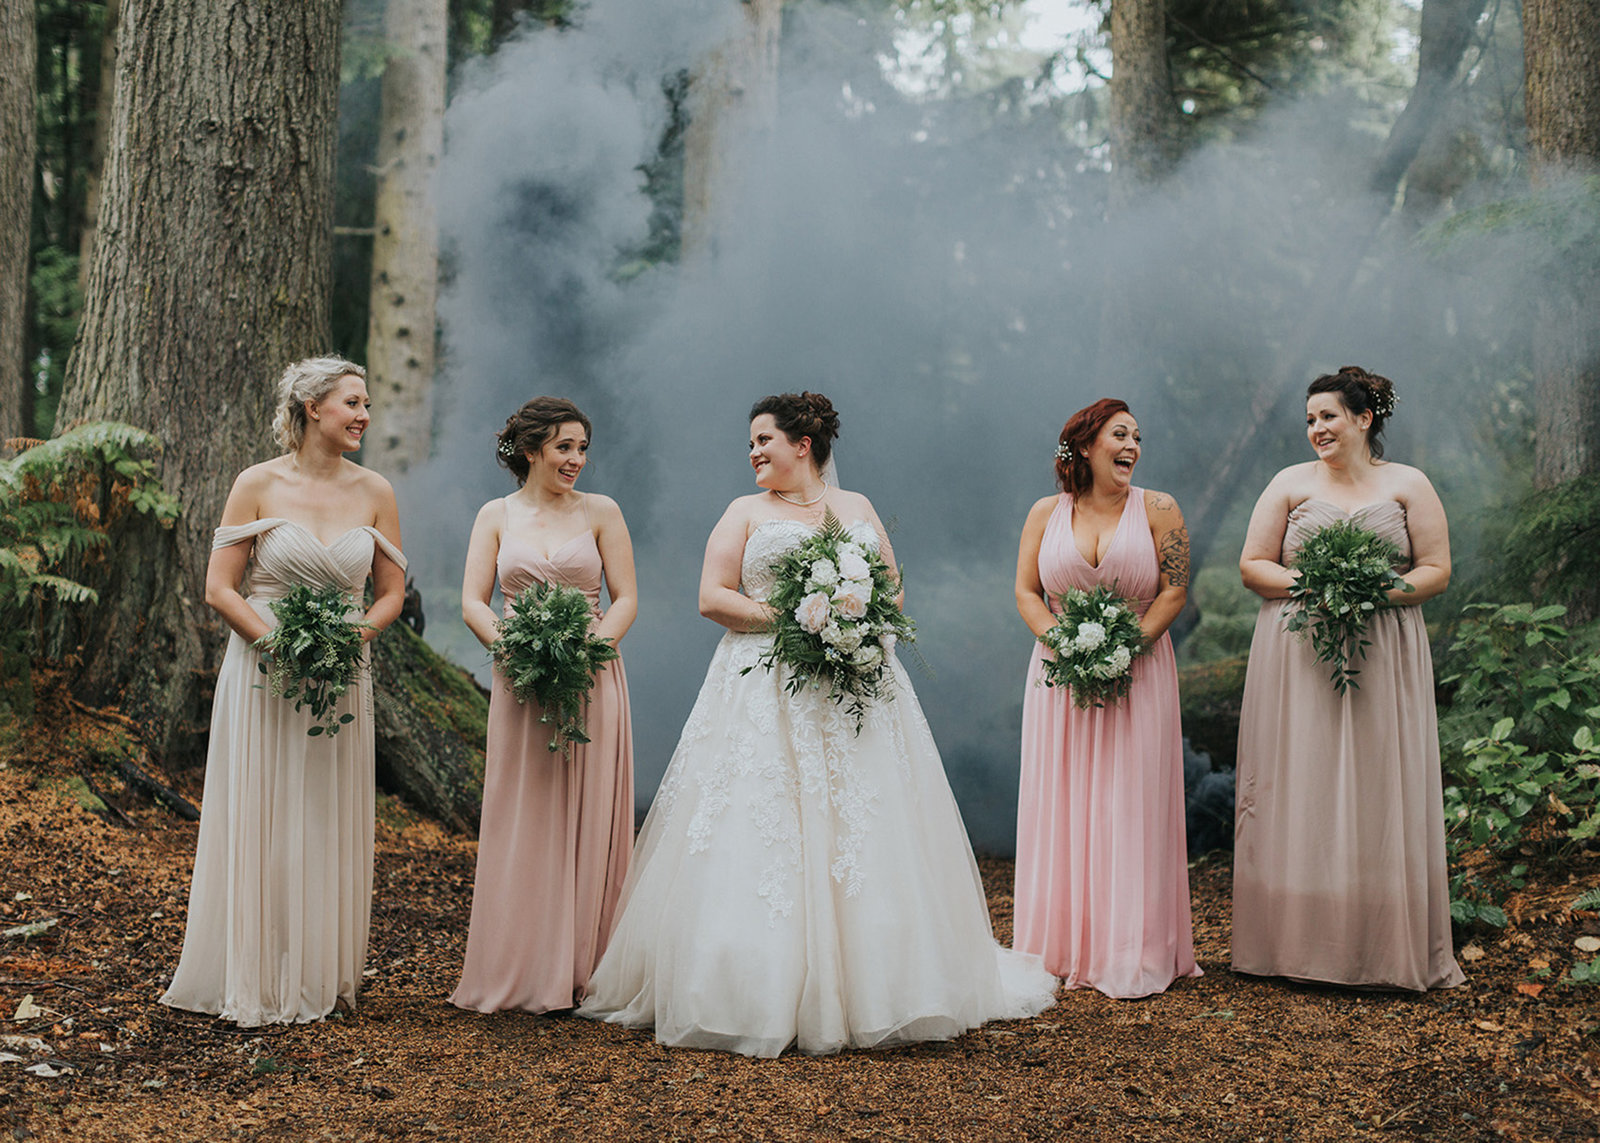 Bride and her bridesmaids sharing a laugh in the forest